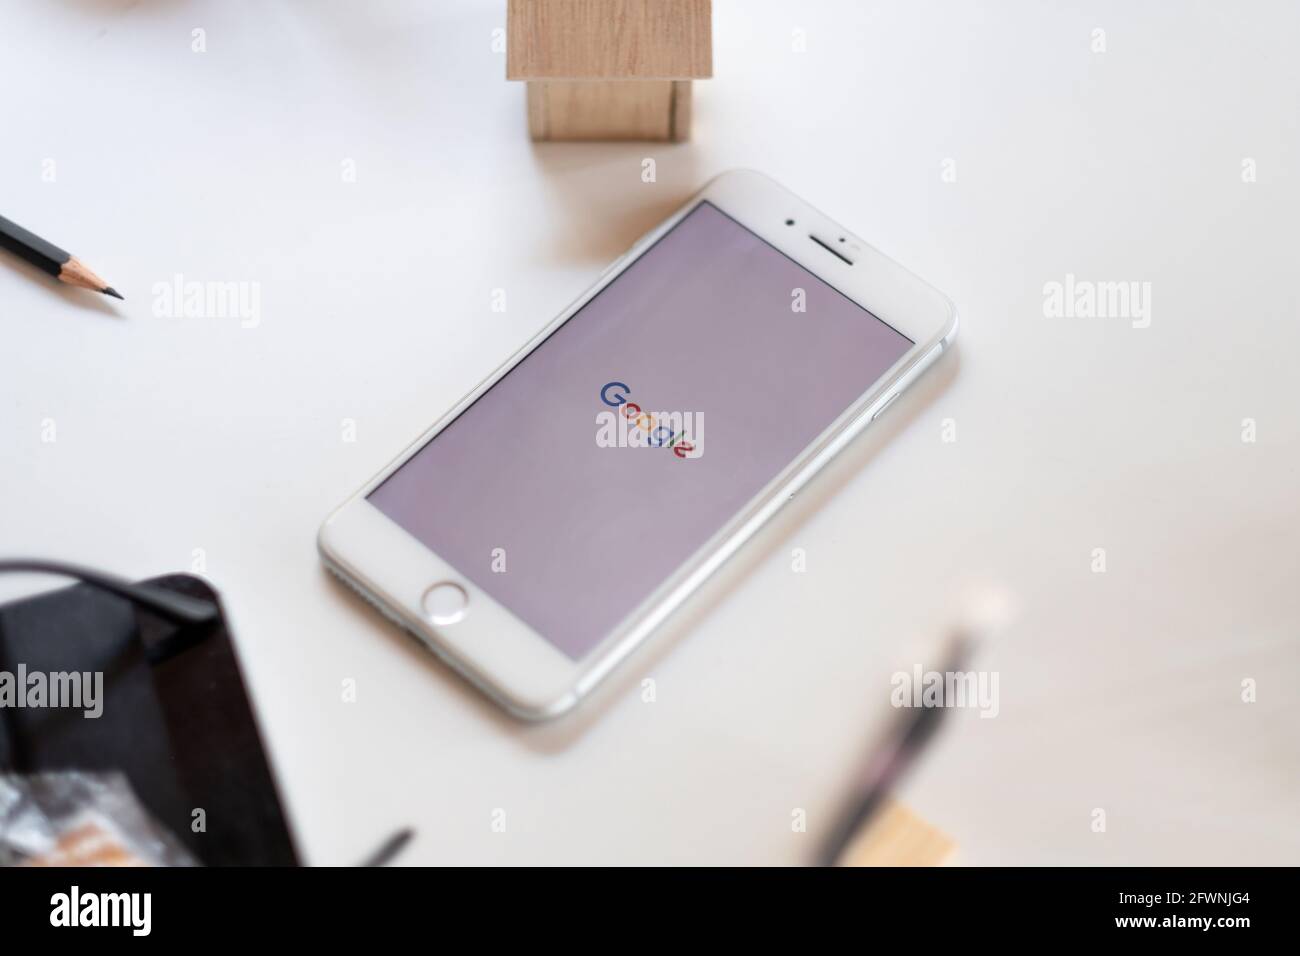 CHIANG MAI,THAILAND-MAY 16, 2021 Close-up image of smartphone with Google app on iPhone is an online social networking is popular In year Stock Photo